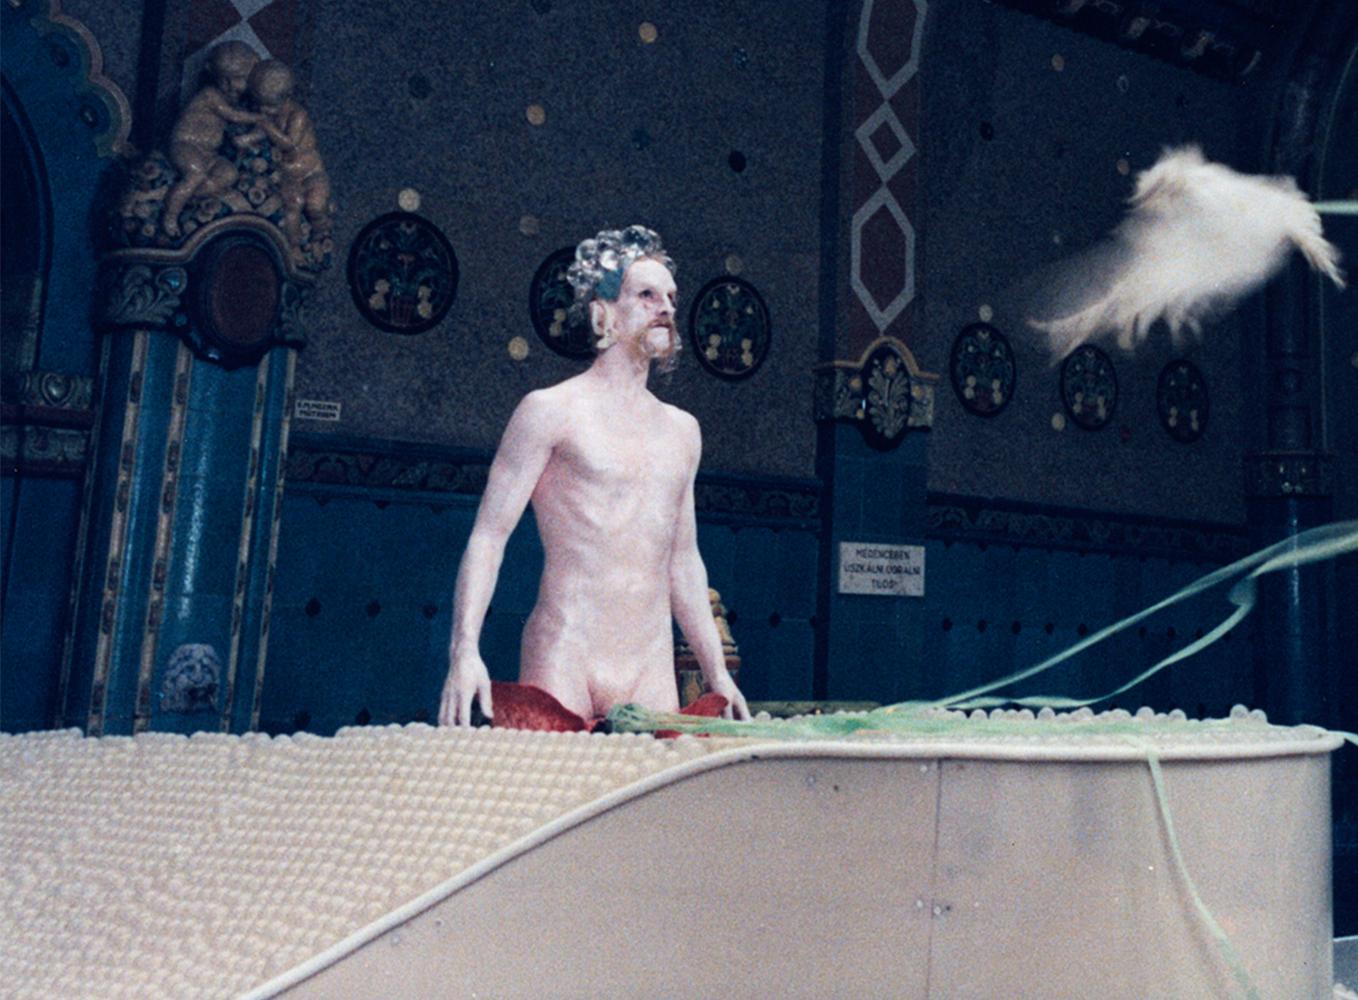 Matthew Barney, Cremaster 5, Limited edition color photograph. - Photograph by Michael James O’Brien